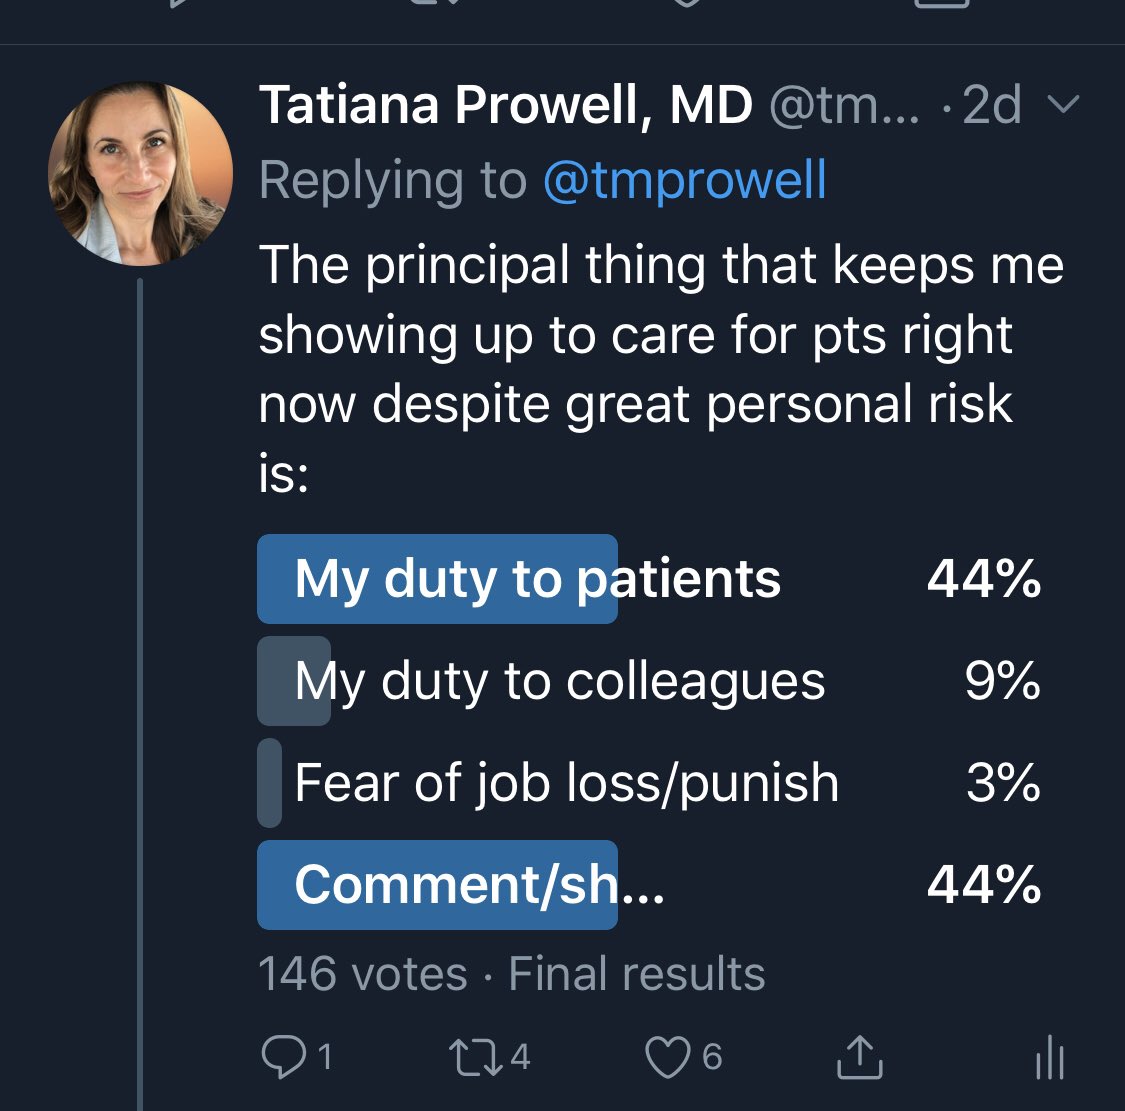 Tweet 3/X: As soon as we engage in this debate, we accept  #GetMePPE as “just how it is”. That’s dangerous. No dr consented to risk of death. Drs will show up despite poor PPE. In this  #COVID19 poll, of 82 actual votes, 78% come out of duty to pts & 16% out of duty to colleagues.